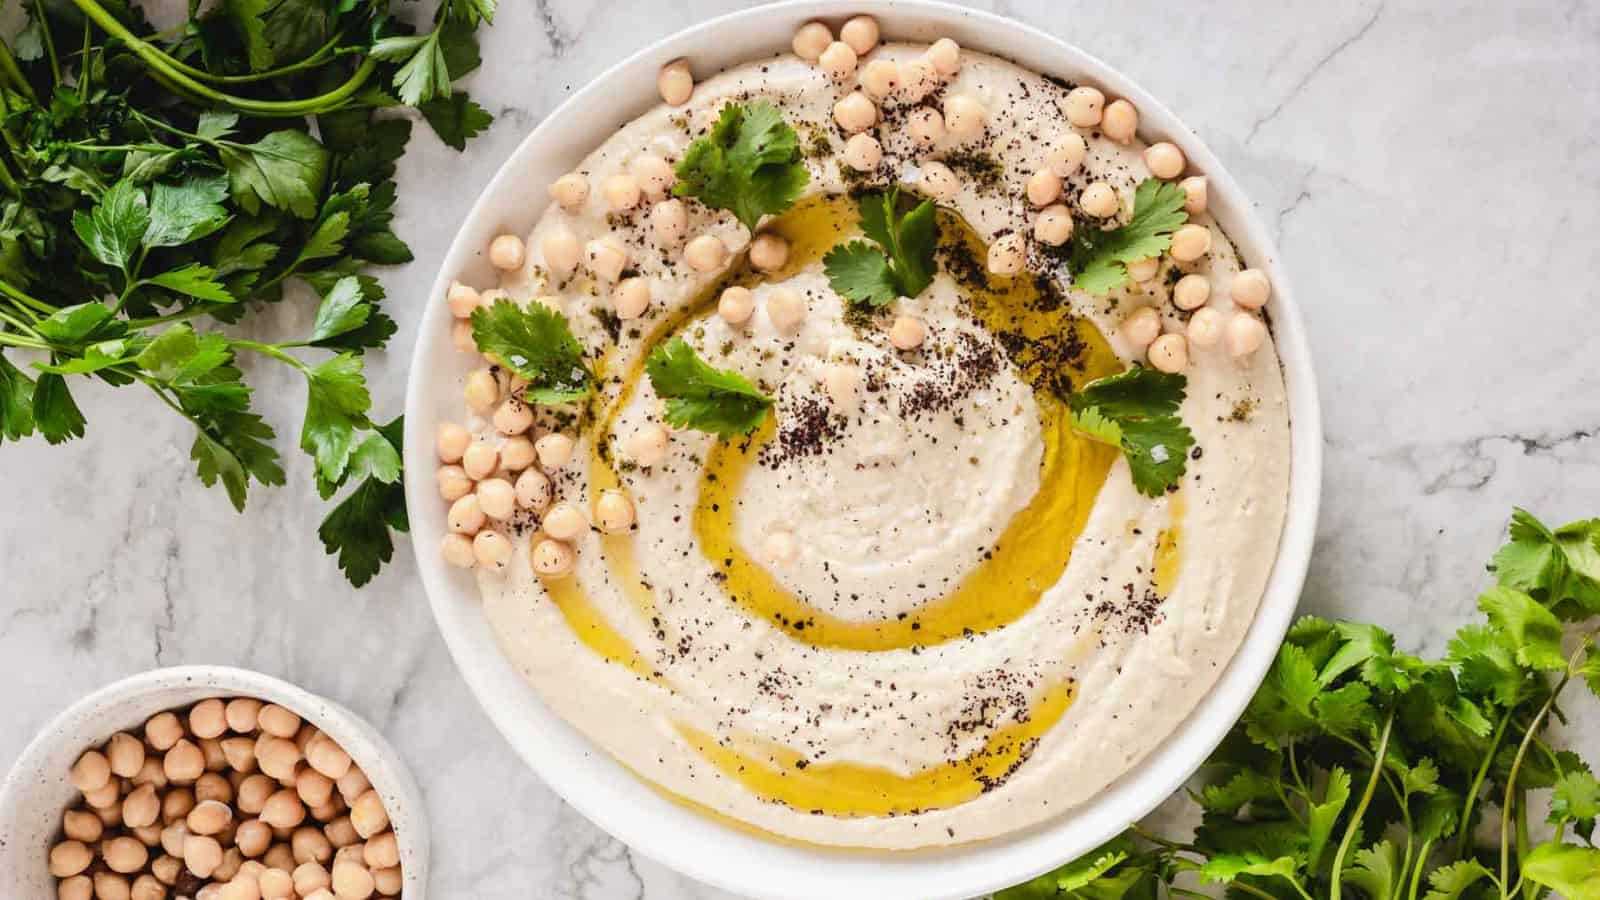 Garlic hummus on plate with parsley, zaatar and olive oil.